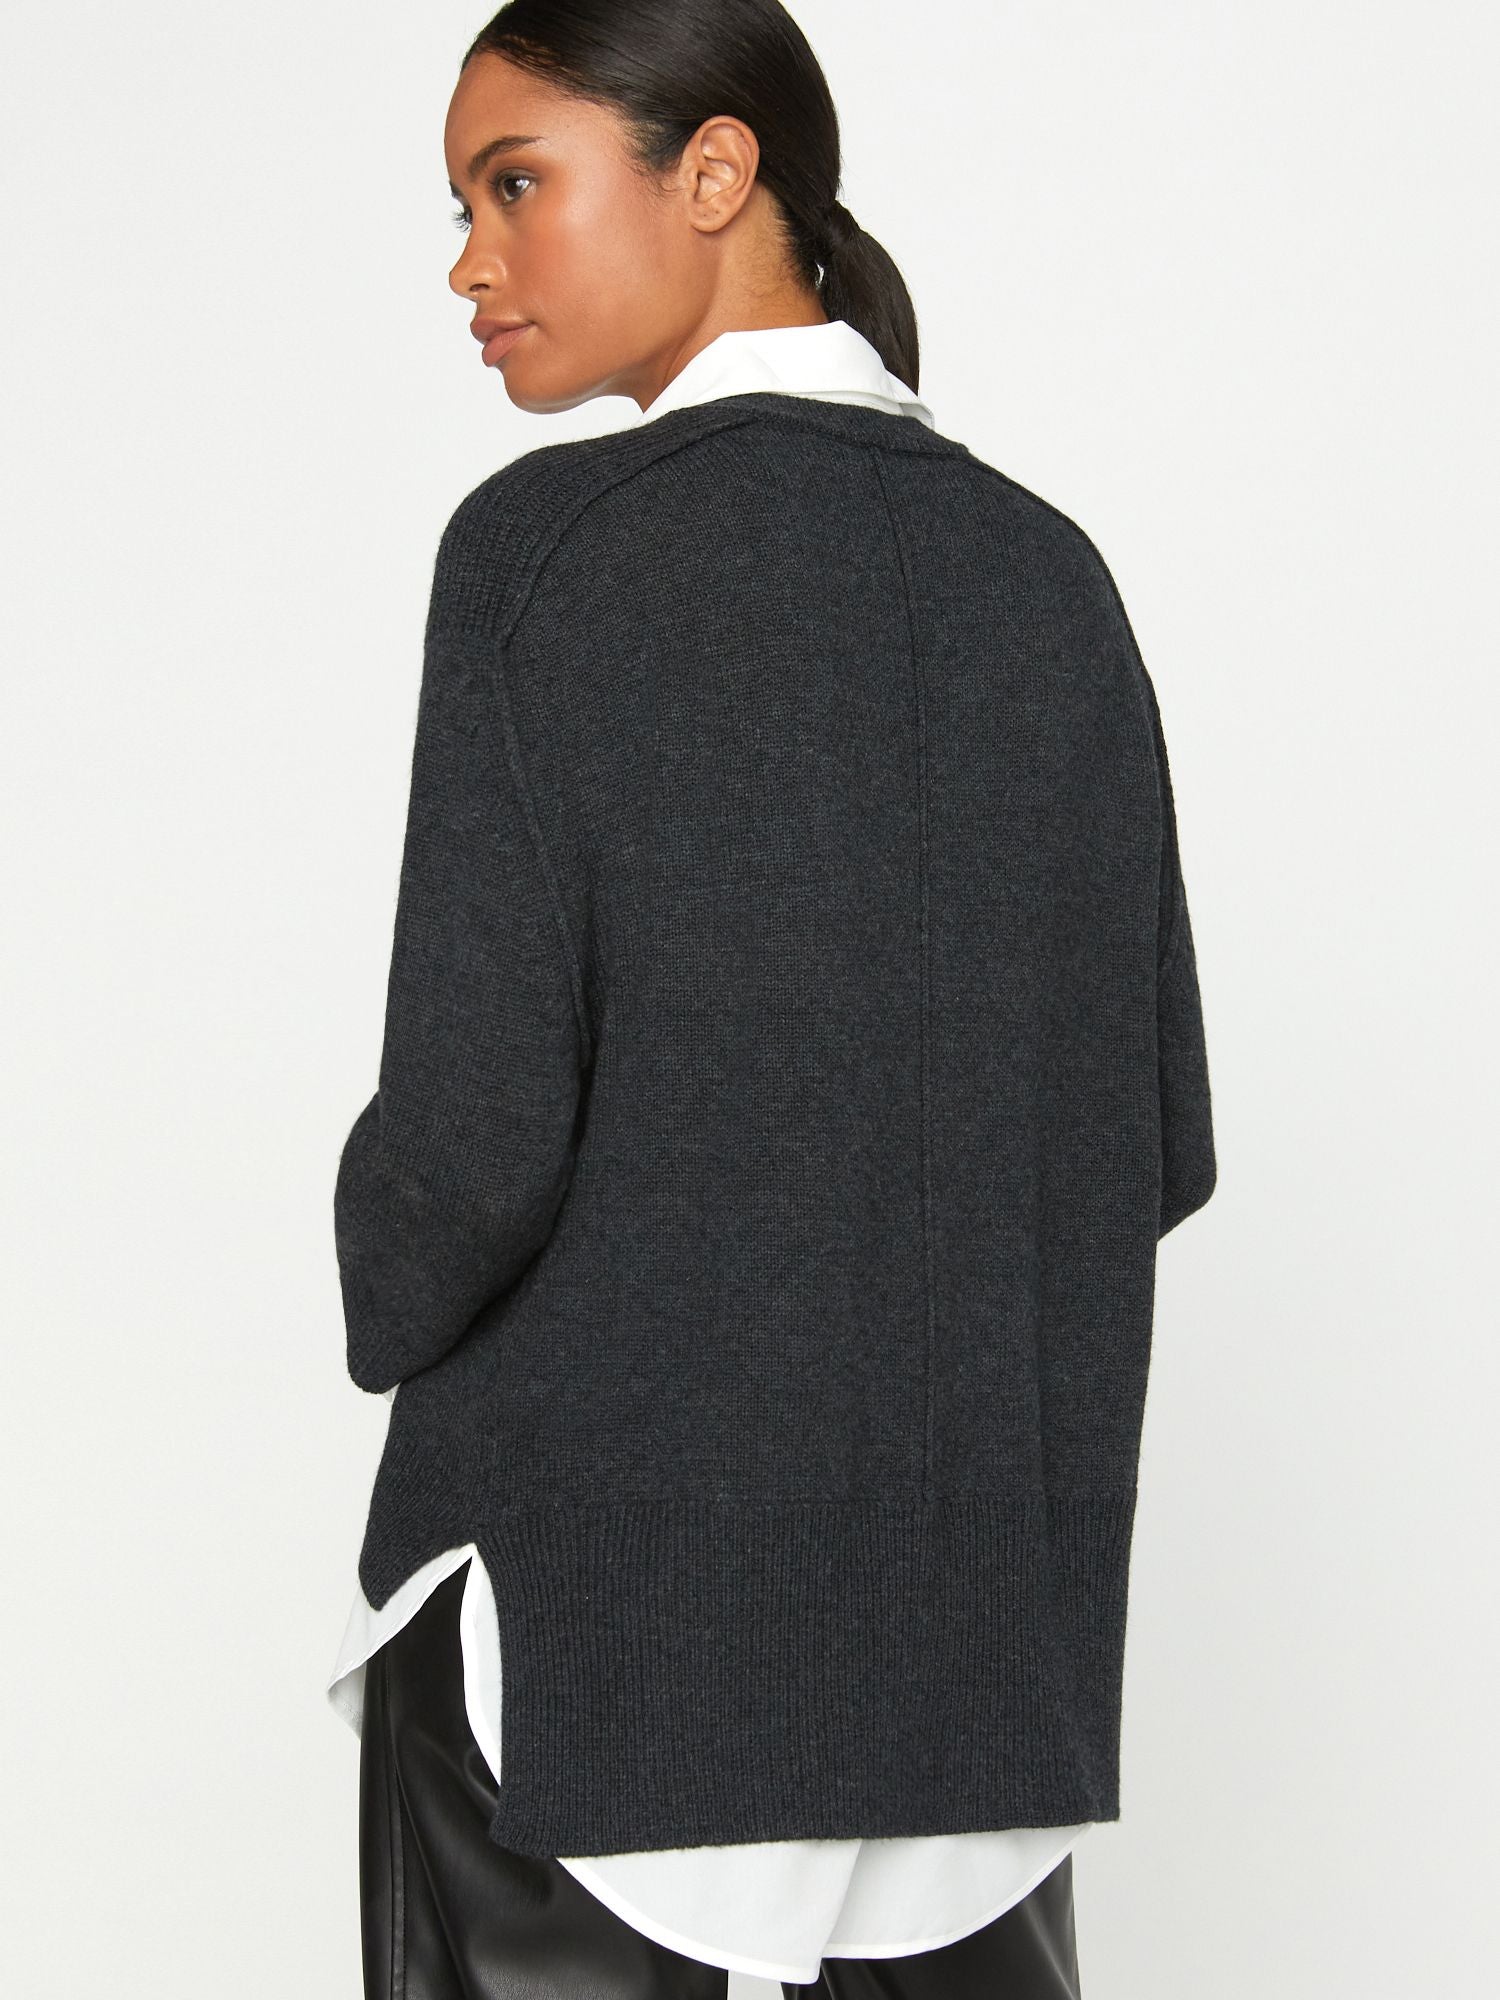 Looker dark grey layered v-neck sweater back view